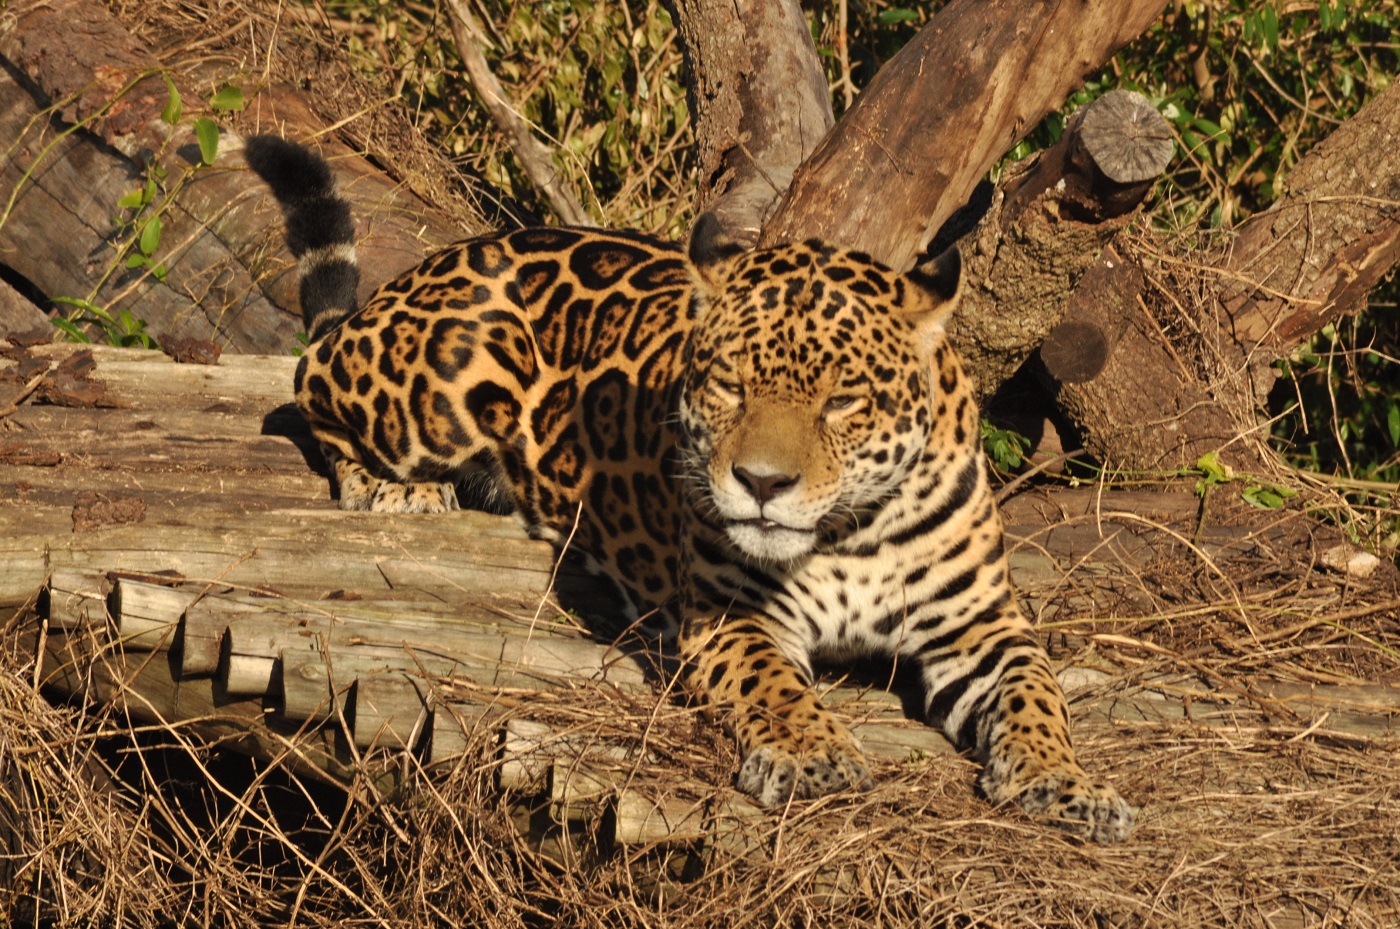 The Guarani people of northeastern Argentina value the jaguar as a symbol of strength and an essential element of the region’s identity.